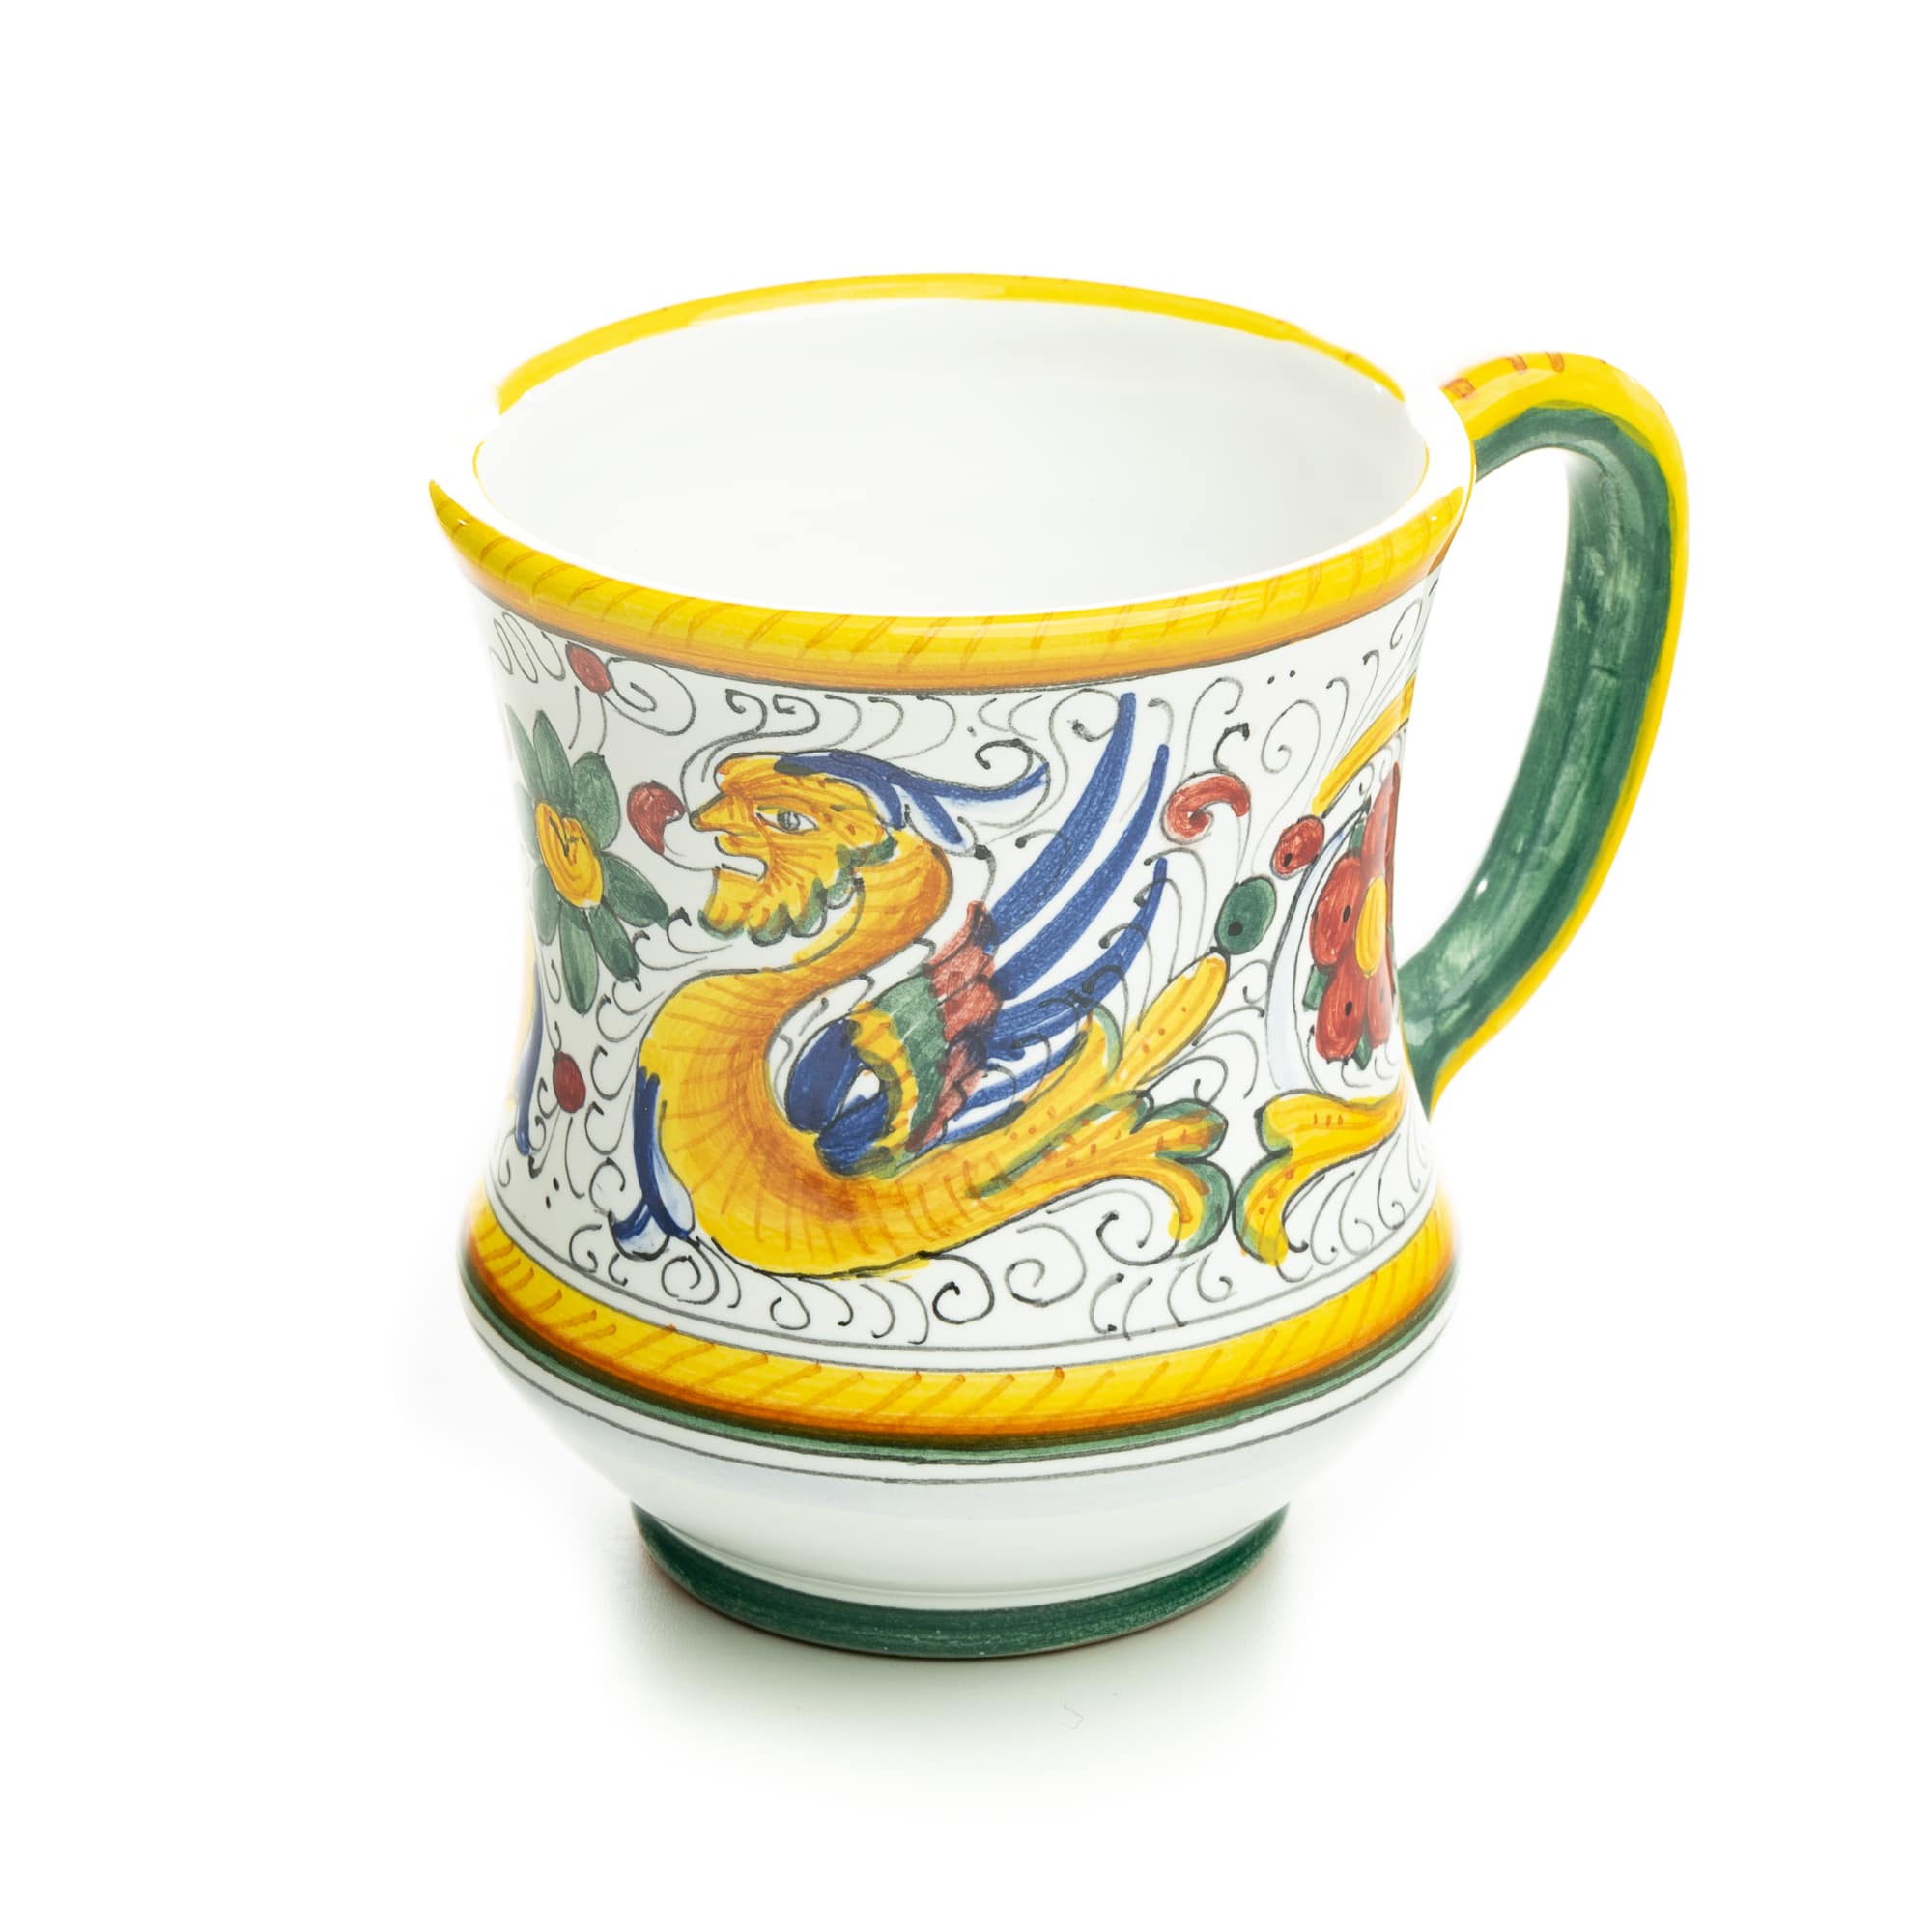 Raffaellesco Curved Mug, ceramics, pottery, italian design, majolica, handmade, handcrafted, handpainted, home decor, kitchen art, home goods, deruta, majolica, Artisan, treasures, traditional art, modern art, gift ideas, style, SF, shop small business, artists, shop online, landmark store, legacy, one of a kind, limited edition, gift guide, gift shop, retail shop, decorations, shopping, italy, home staging, home decorating, home interiors